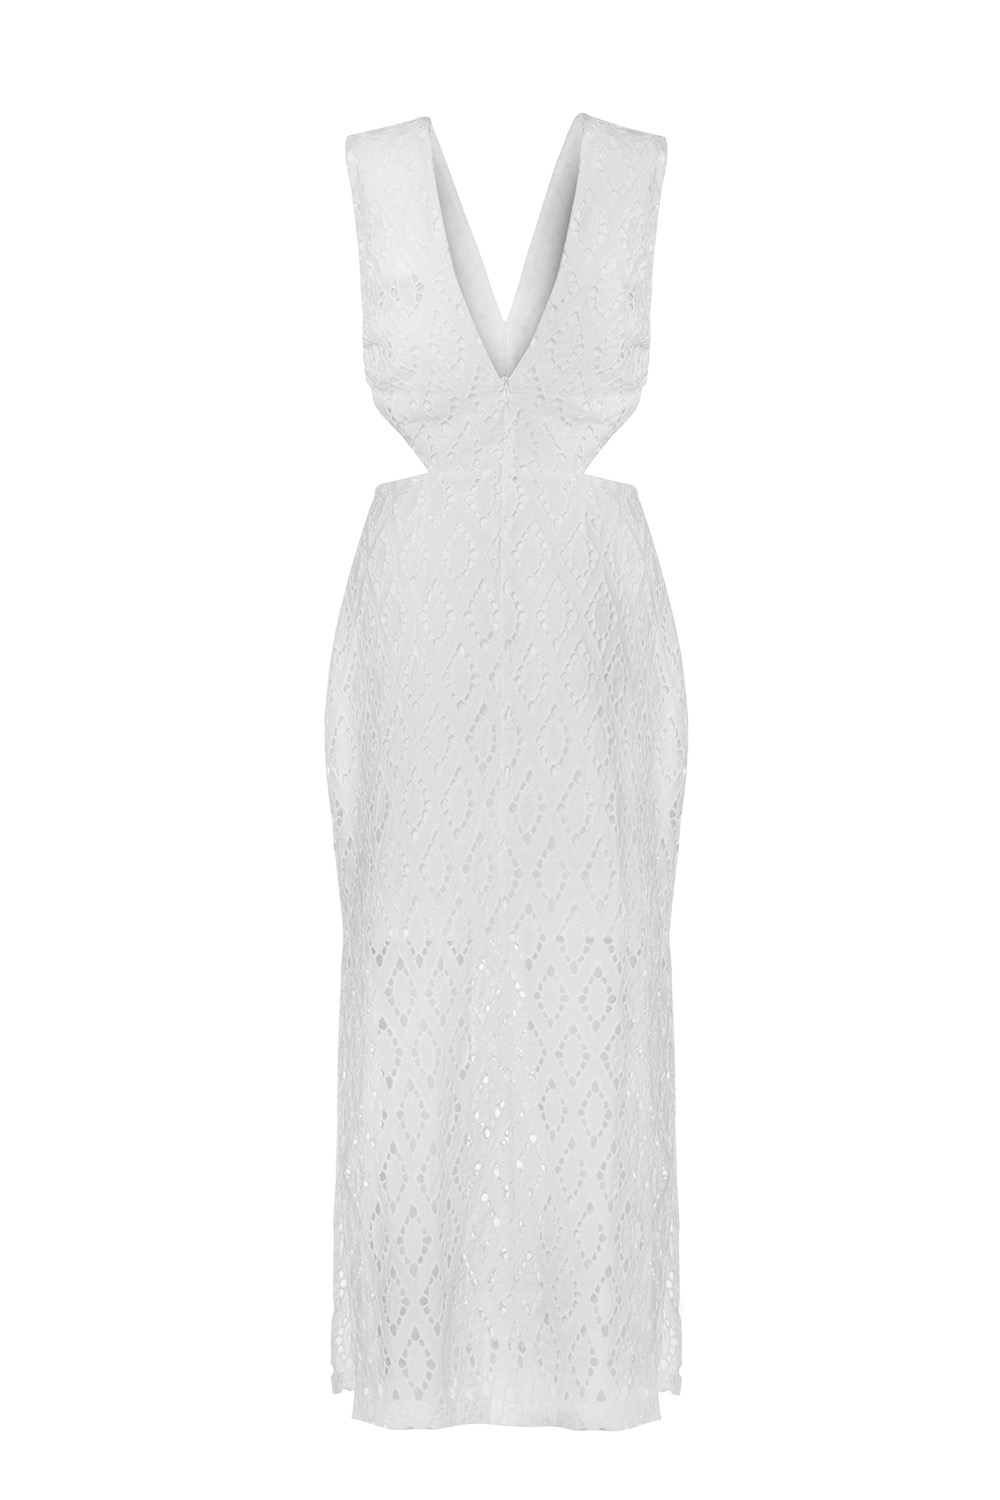 Venice White Embroidered Long Cut-out Summer Dress With Side Slits